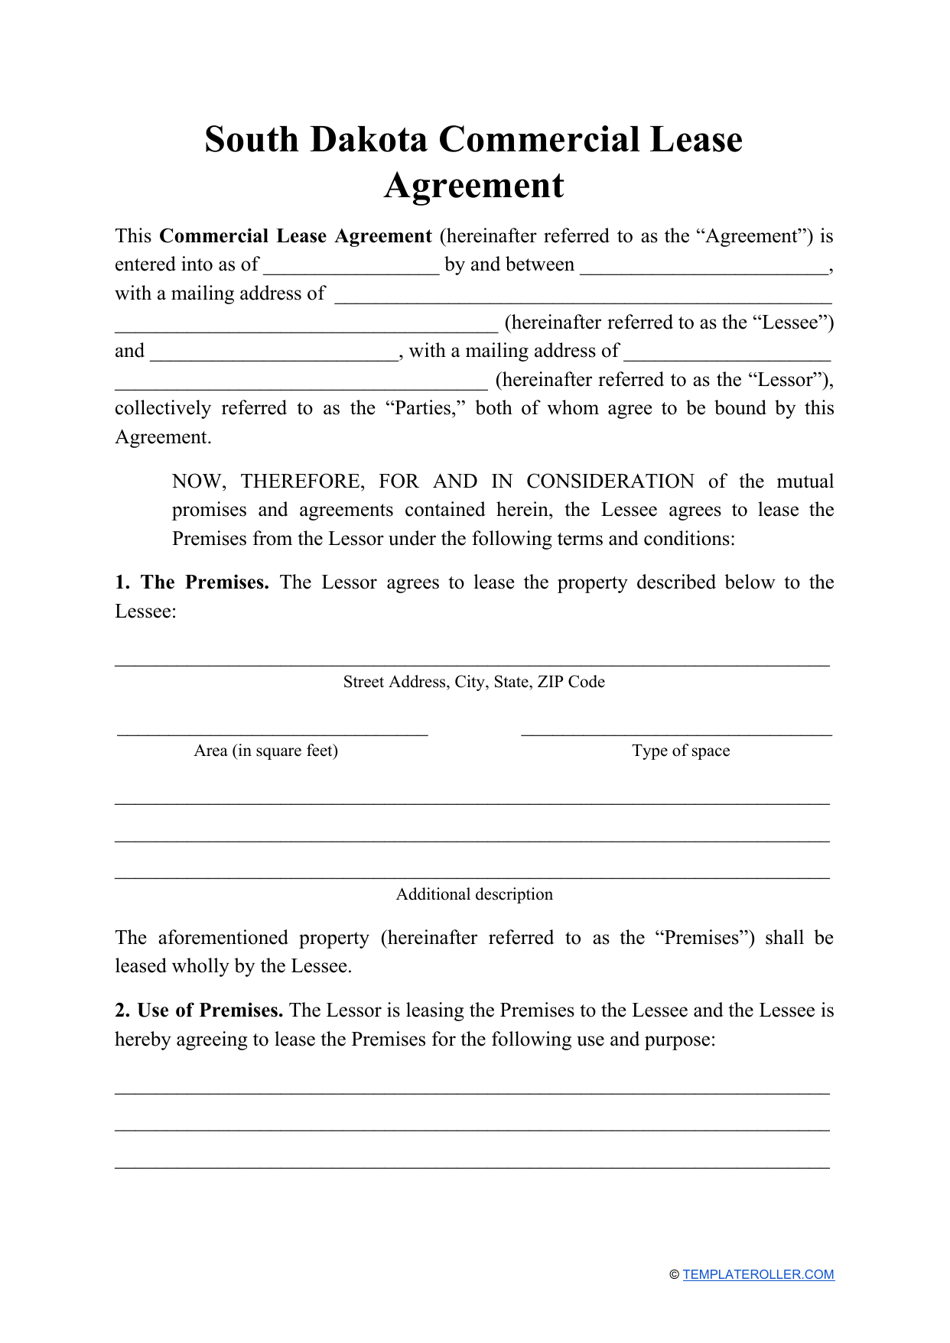 Commercial Lease Agreement Template - South Dakota, Page 1